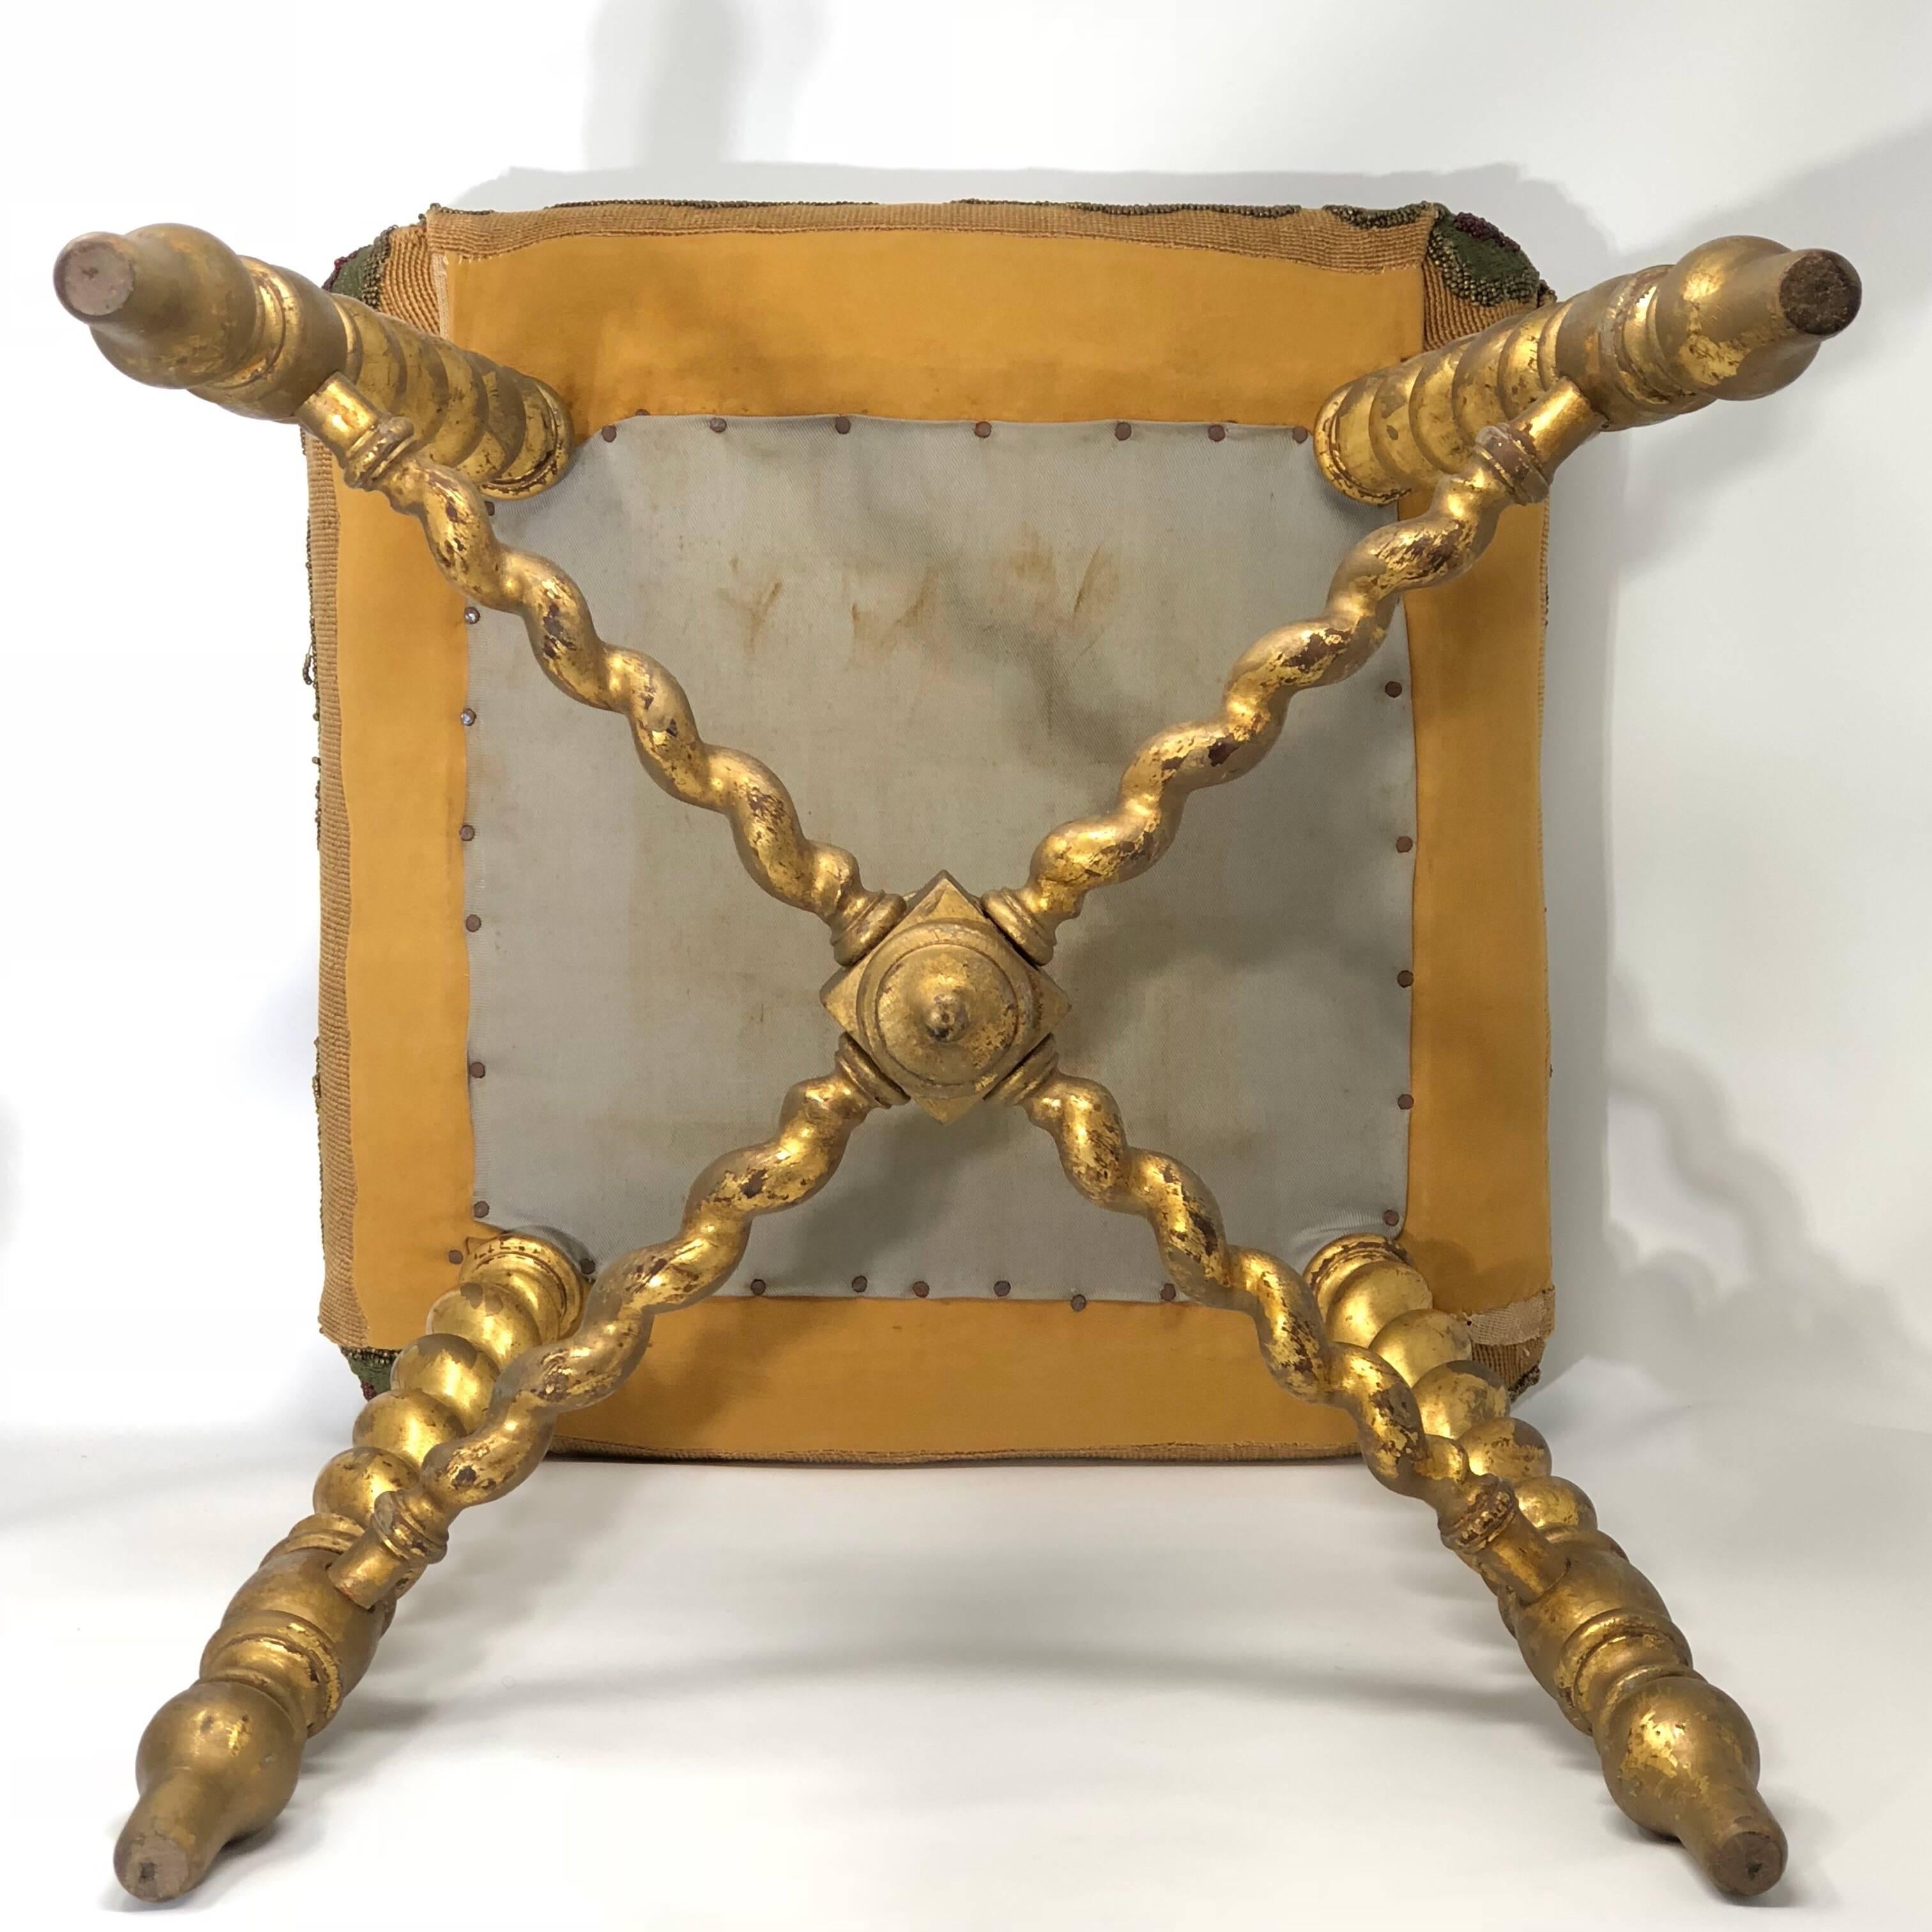 19th century, Napoleon III era, France gilding of origin, this glamour ottoman/stool has a square tapestry seat. Very easily to reupholster. The piece is very sturdy and in beautiful original condition.
The seat dimensions are 16